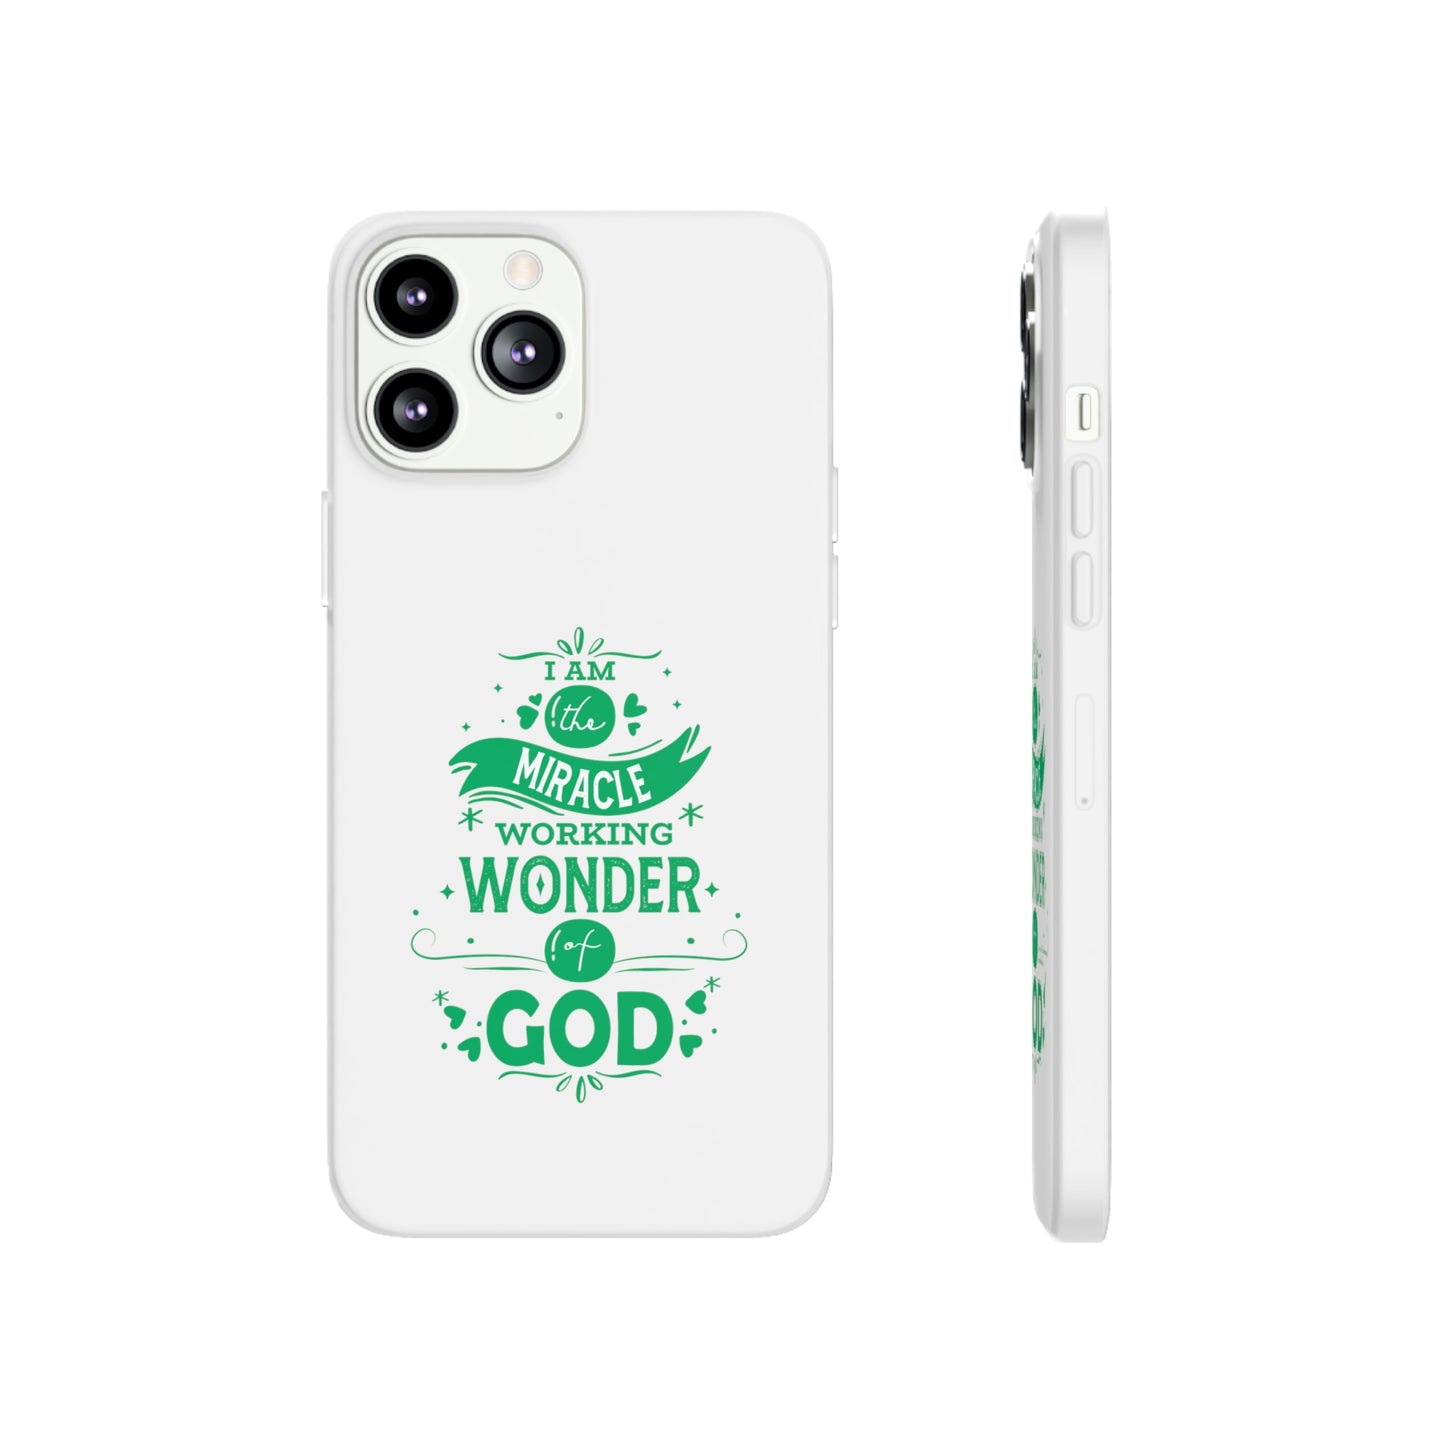 I Am A Miracle Working Wonder Of God Flexi Phone Case